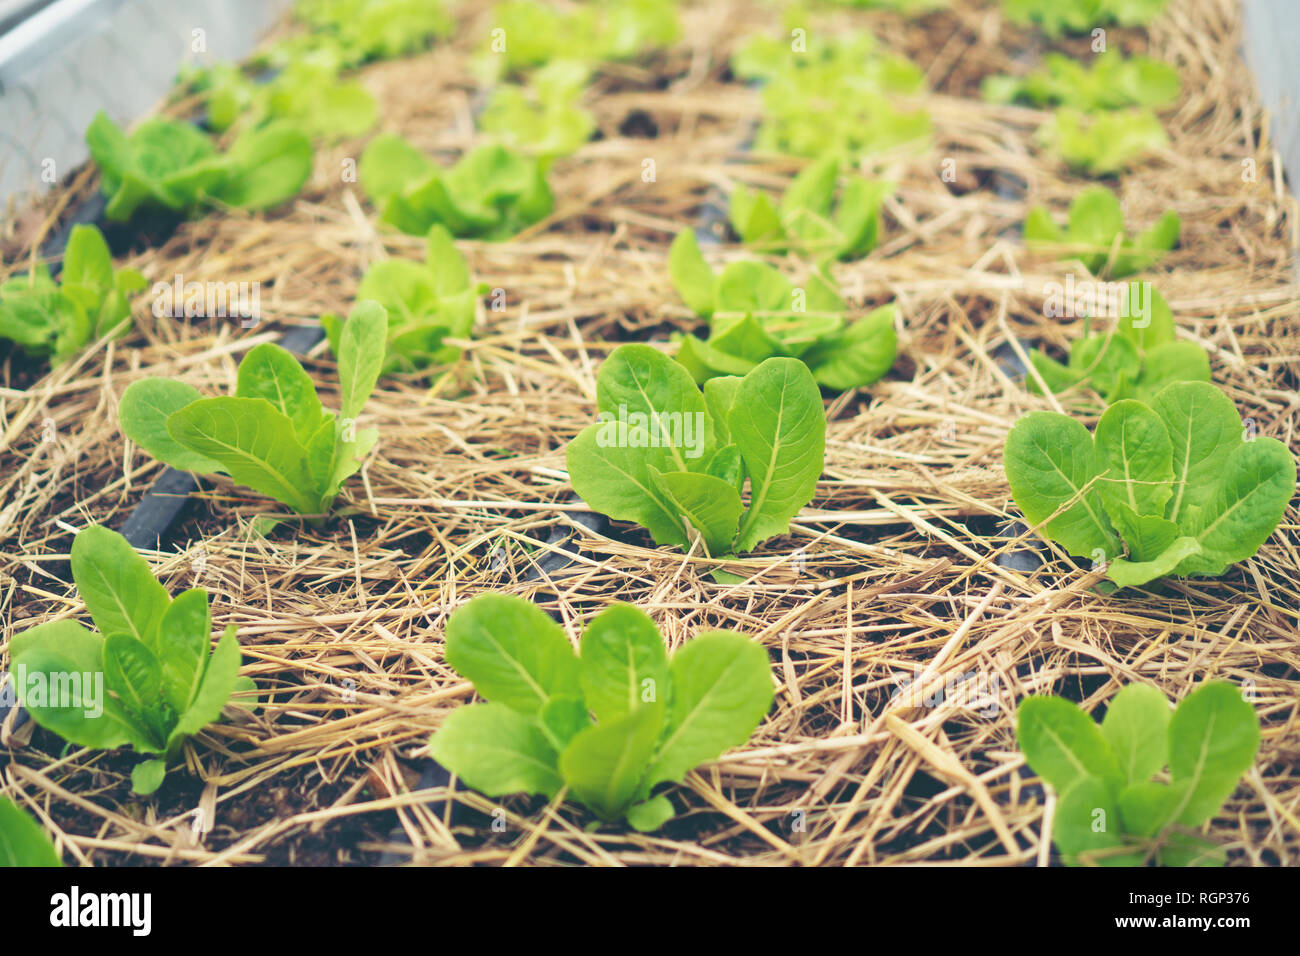 Technology for growing vegetables in greenhouses Stock Photo - Alamy